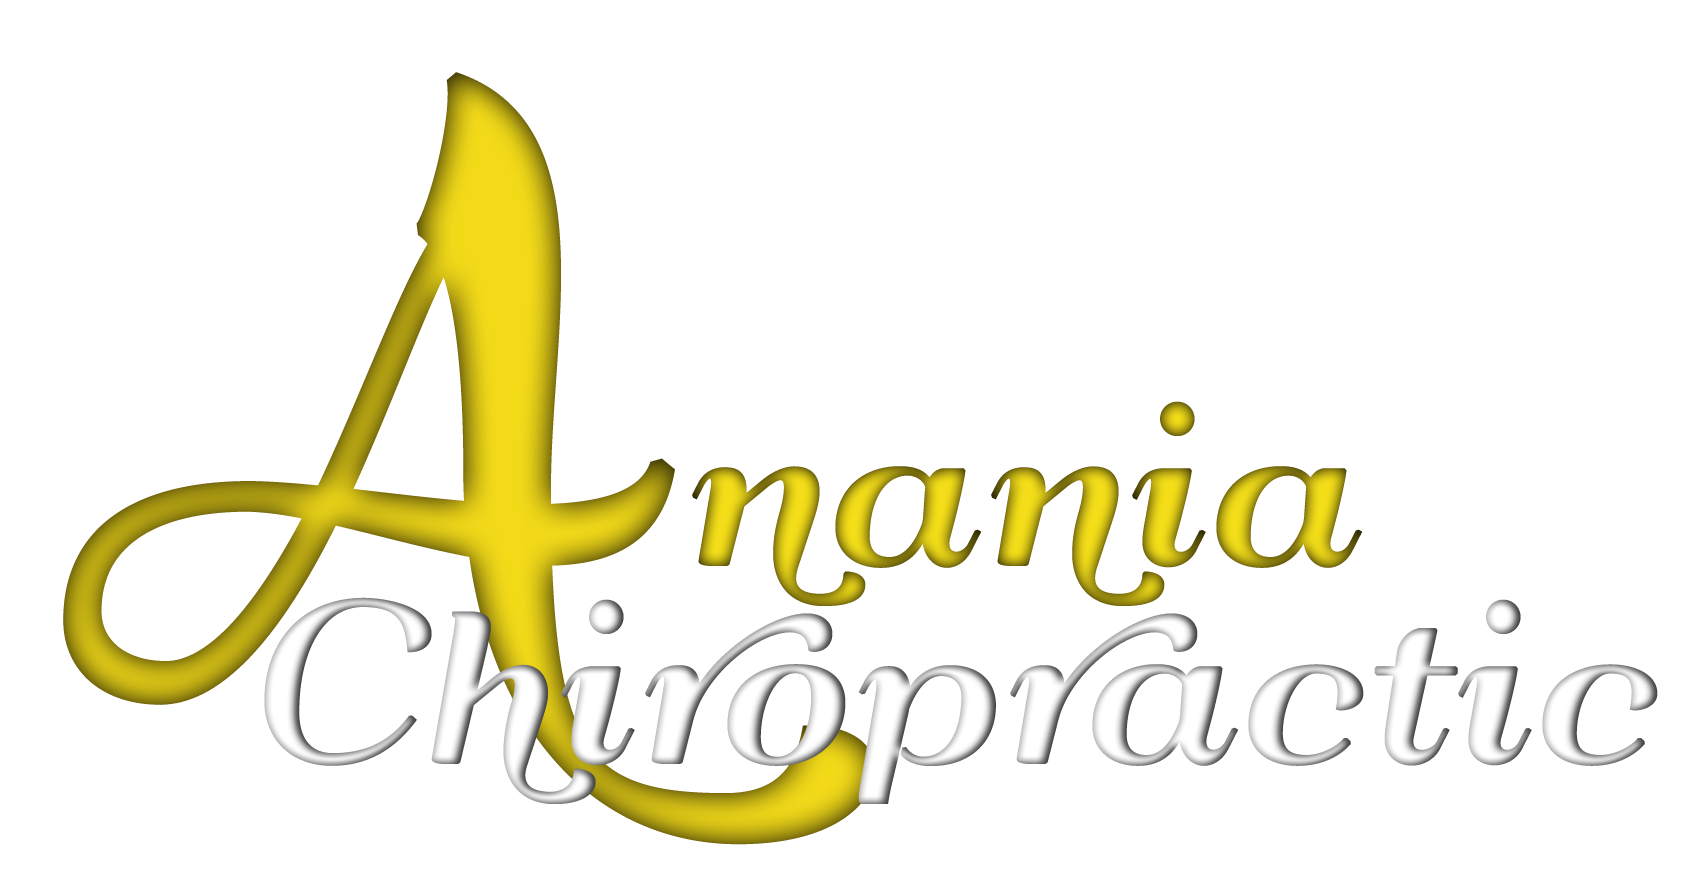 Anania Chiropractic - Home Page